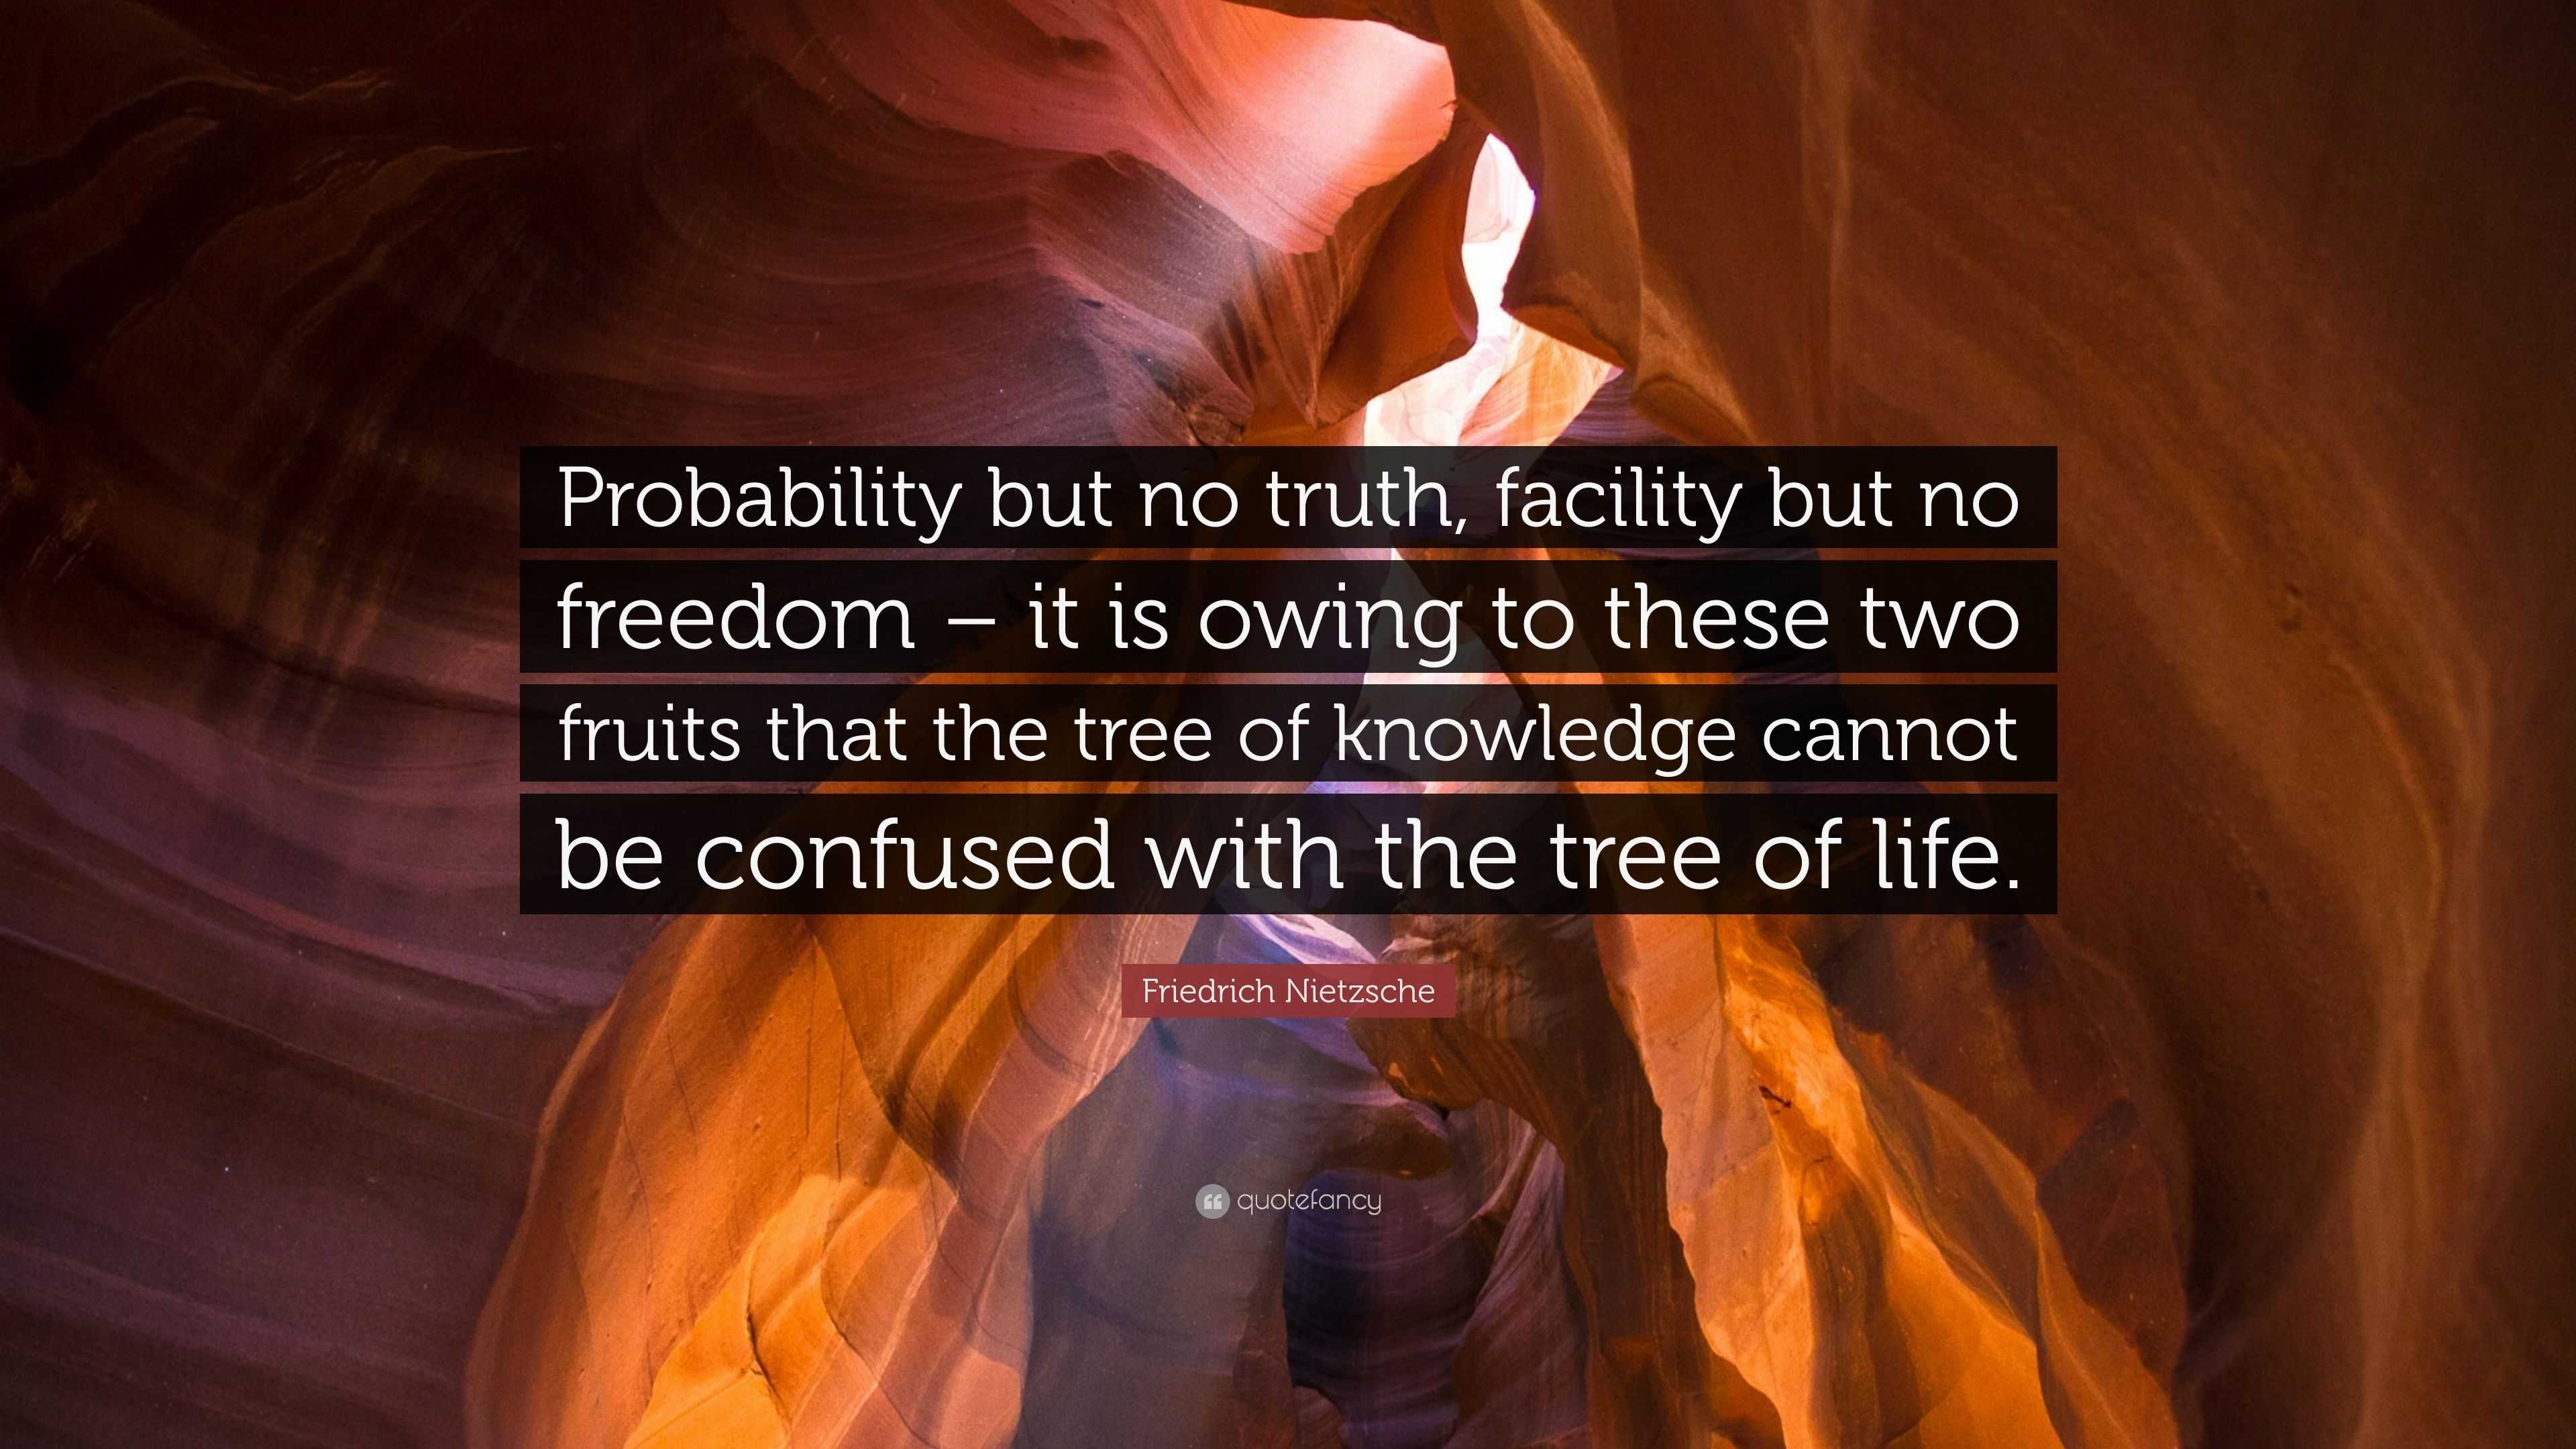 Friedrich Nietzsche Quote “Probability but no truth facility but no freedom – it